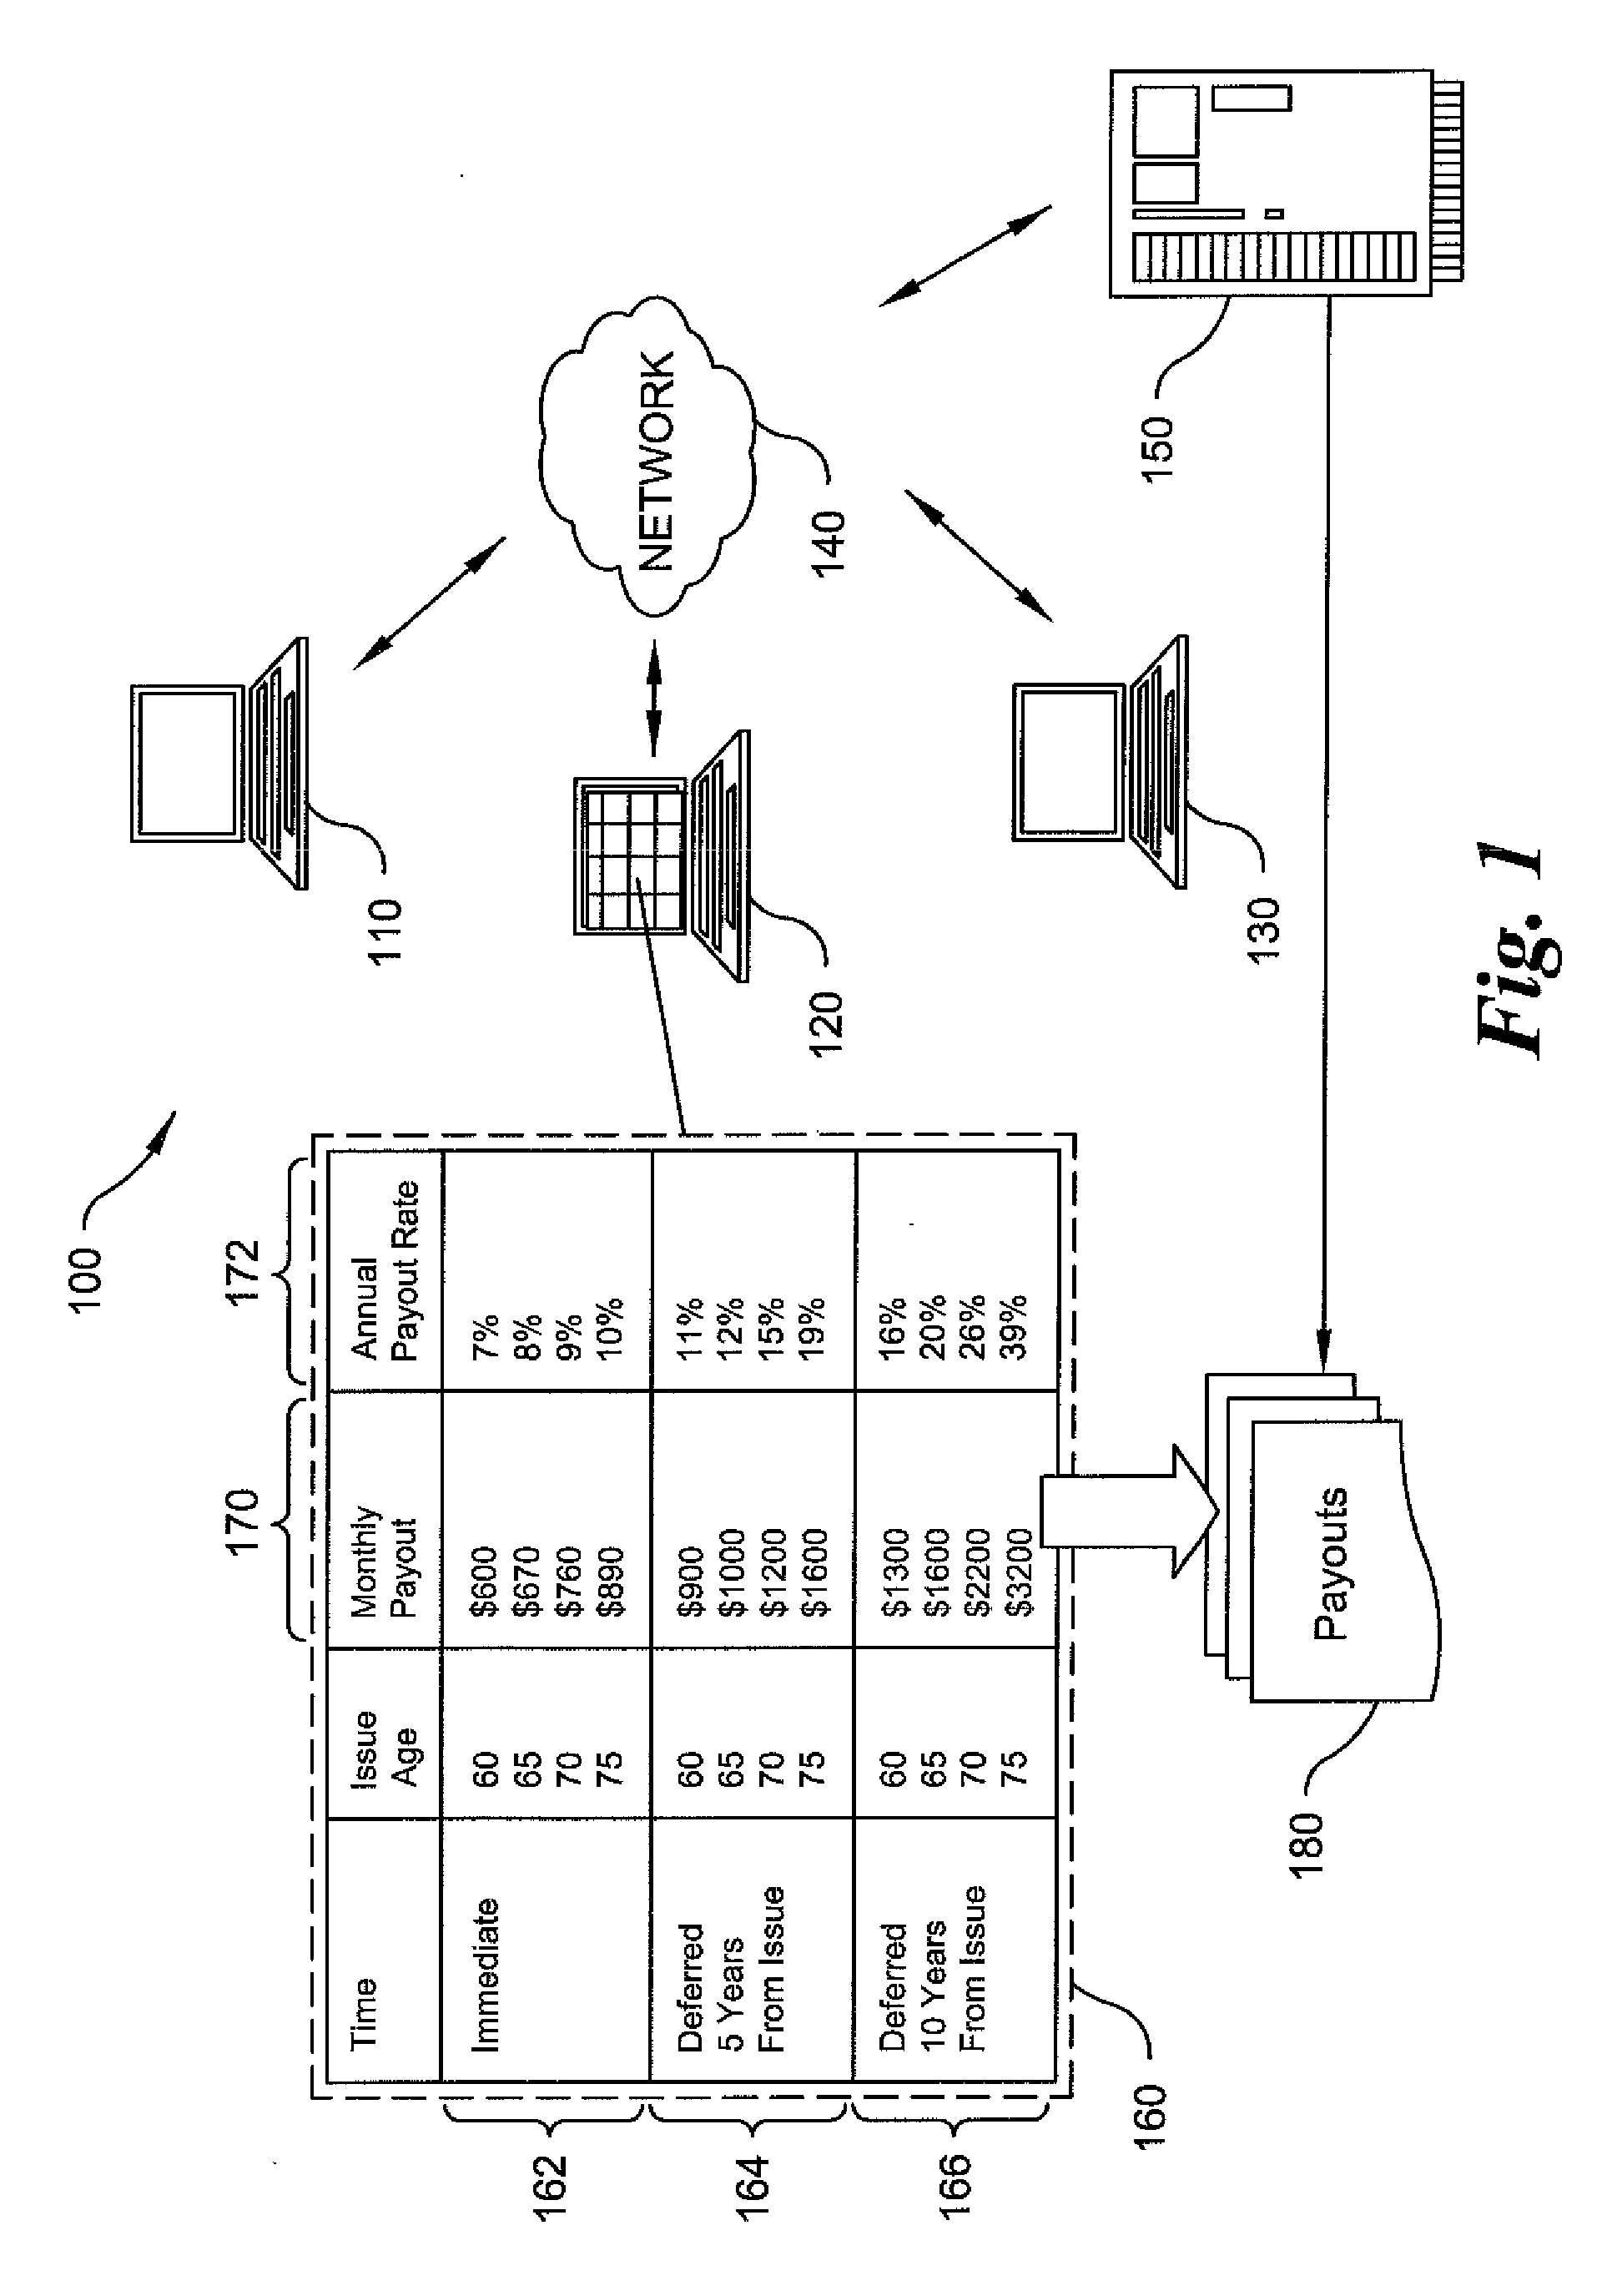 System and method for processing and administering flexible guaranteed income payments